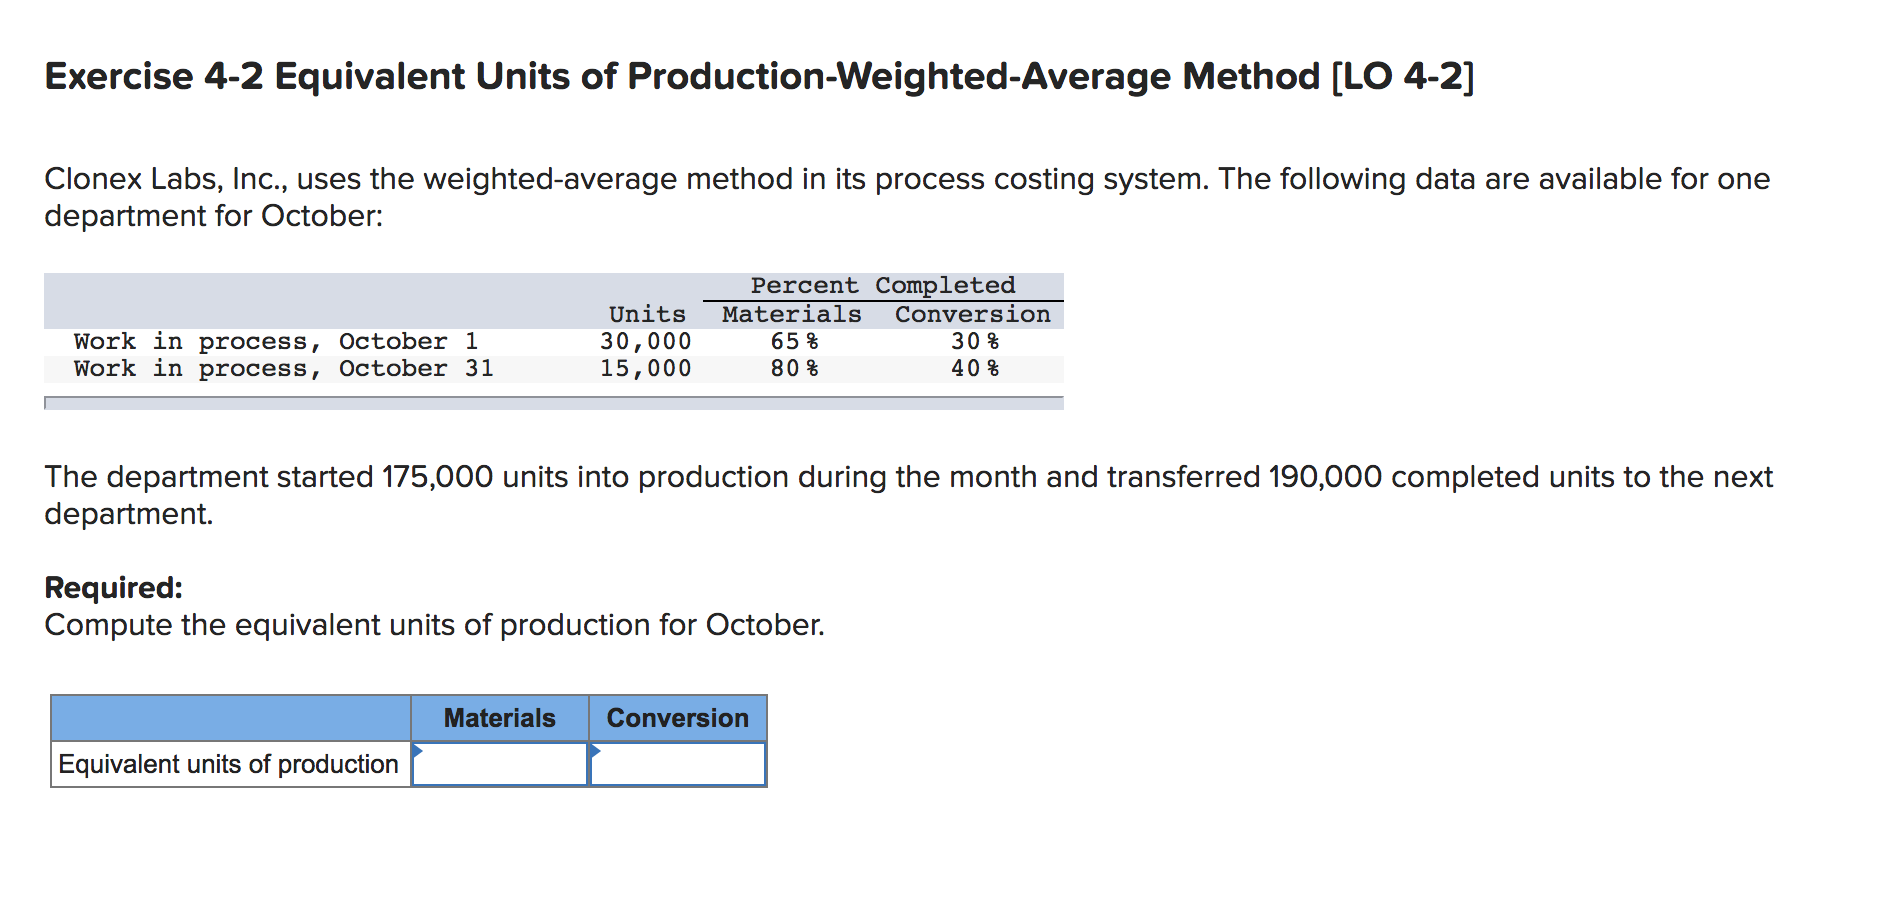 Exercise 4-2 Equivalent Units of Production-Weighted-Average Method [LO 4-2]
Clonex Labs, Inc., uses the weighted-average method in its process costing system. The following data are available for one
department for October:
Percent Completed
Materials
Conversion
Units
Work in process, October 1
Work in process, October 31
30,000
15,000
65 %
80 %
30 %
40 %
The department started 175,000 units into production during the month and transferred 190,000 completed units to the next
department.
Required:
Compute the equivalent units of production for October.
Materials
Conversion
Equivalent units of production
